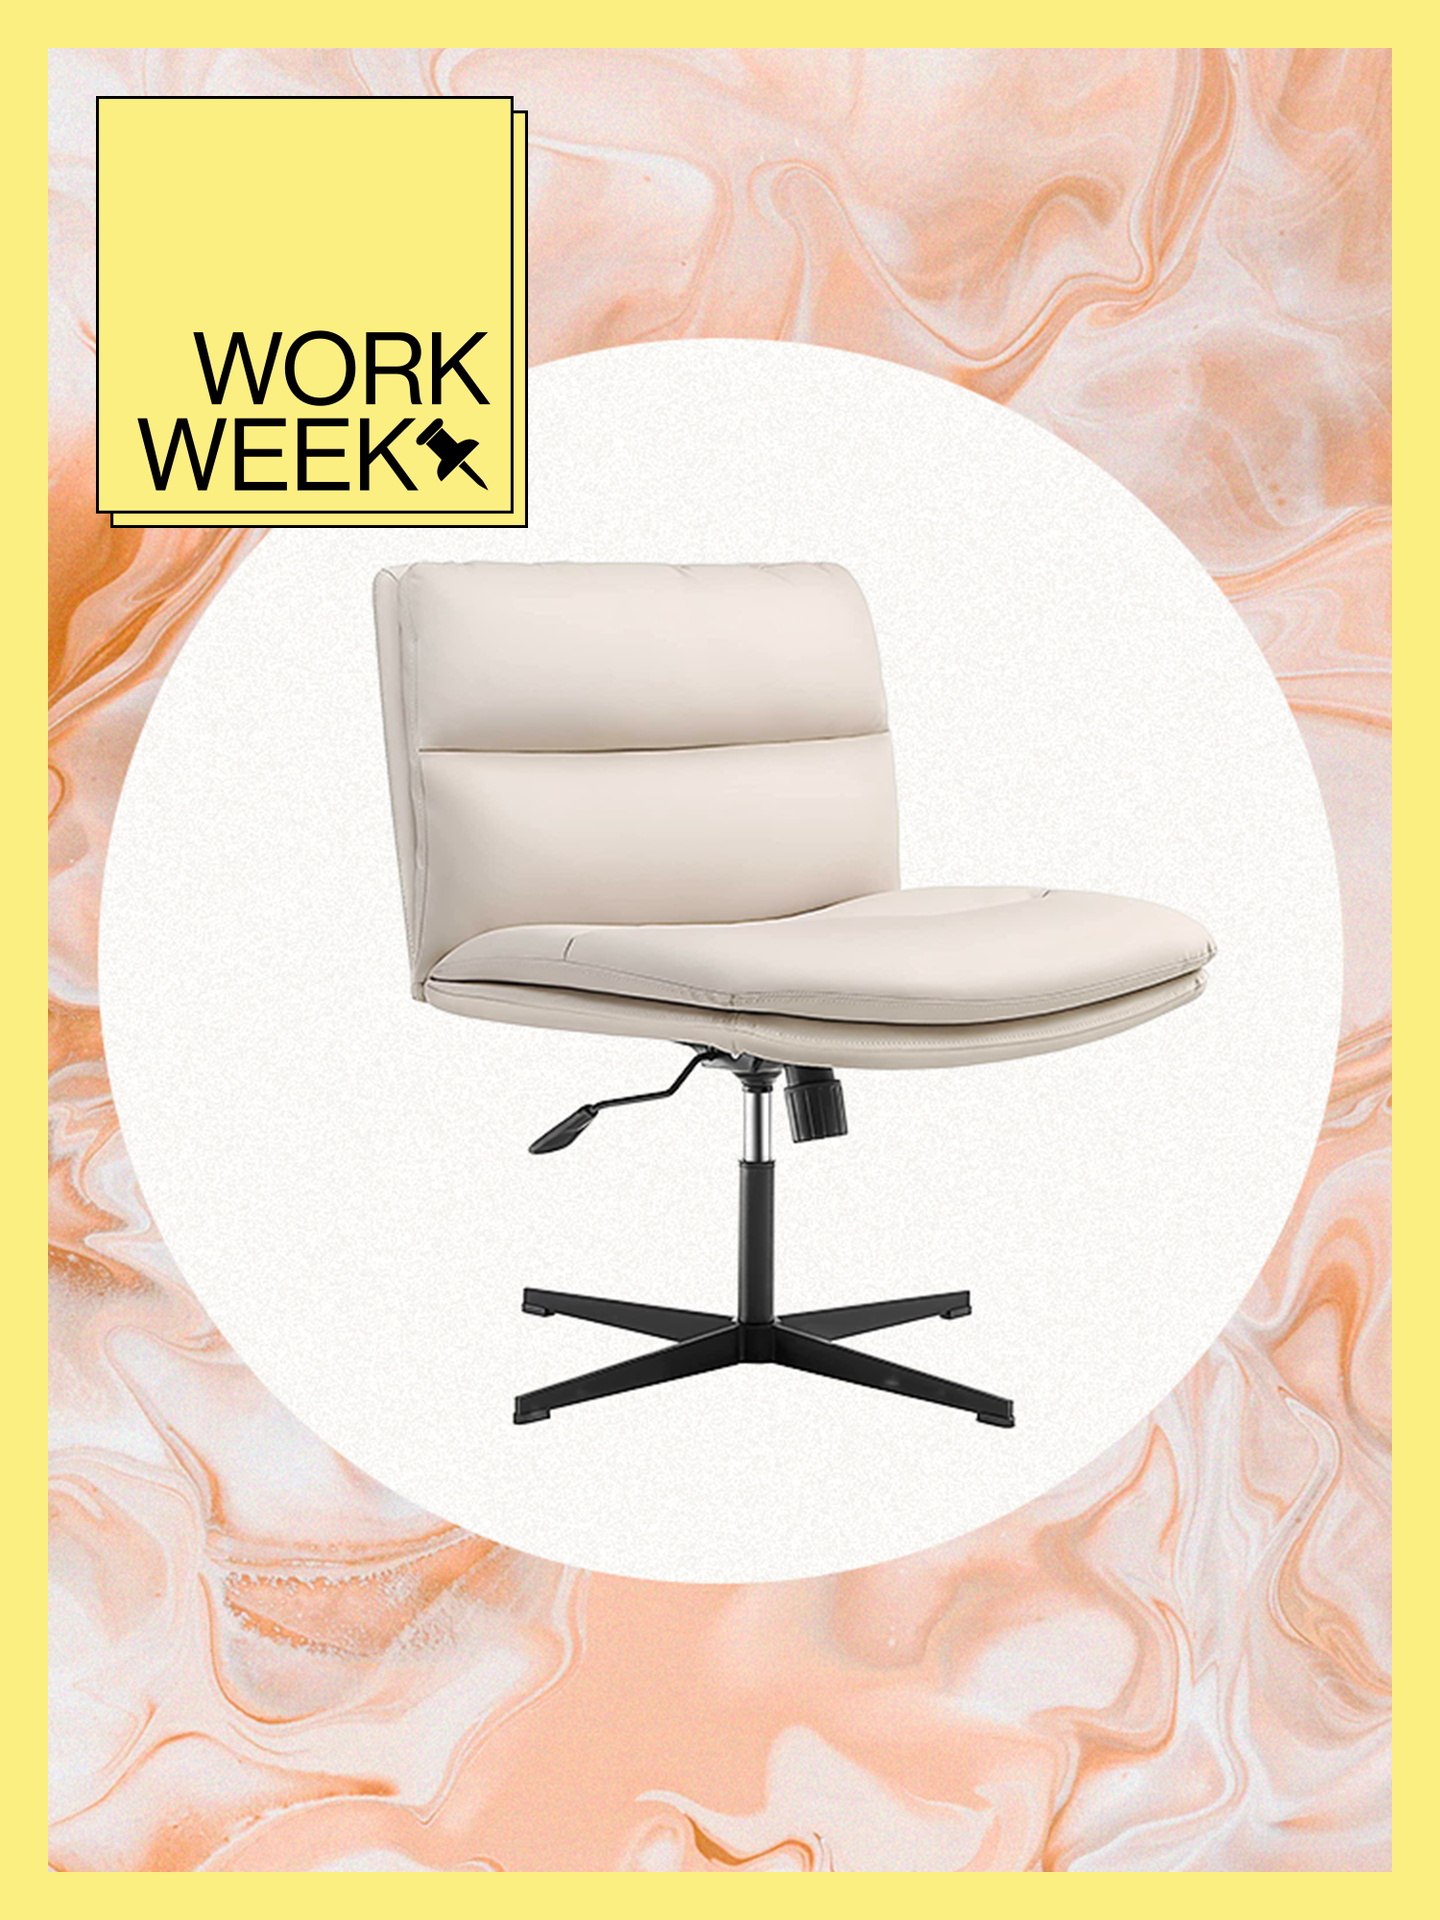 Amazon armless desk chair in beige with Work Week badge and border.